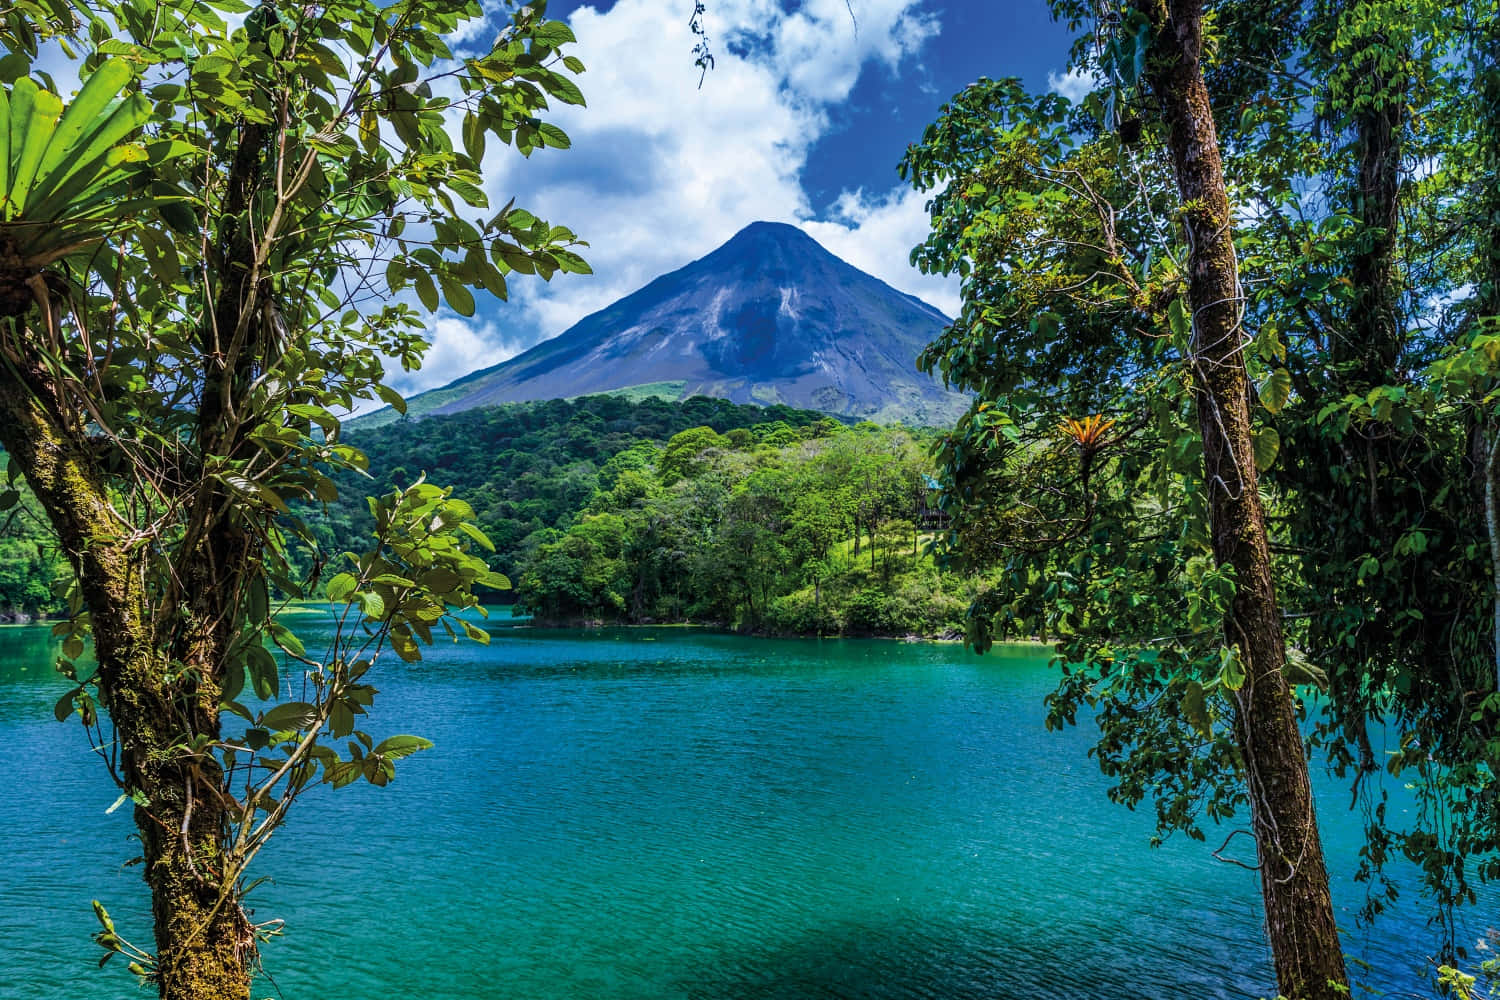 Costa Rica | A Land of Tropical Beauty